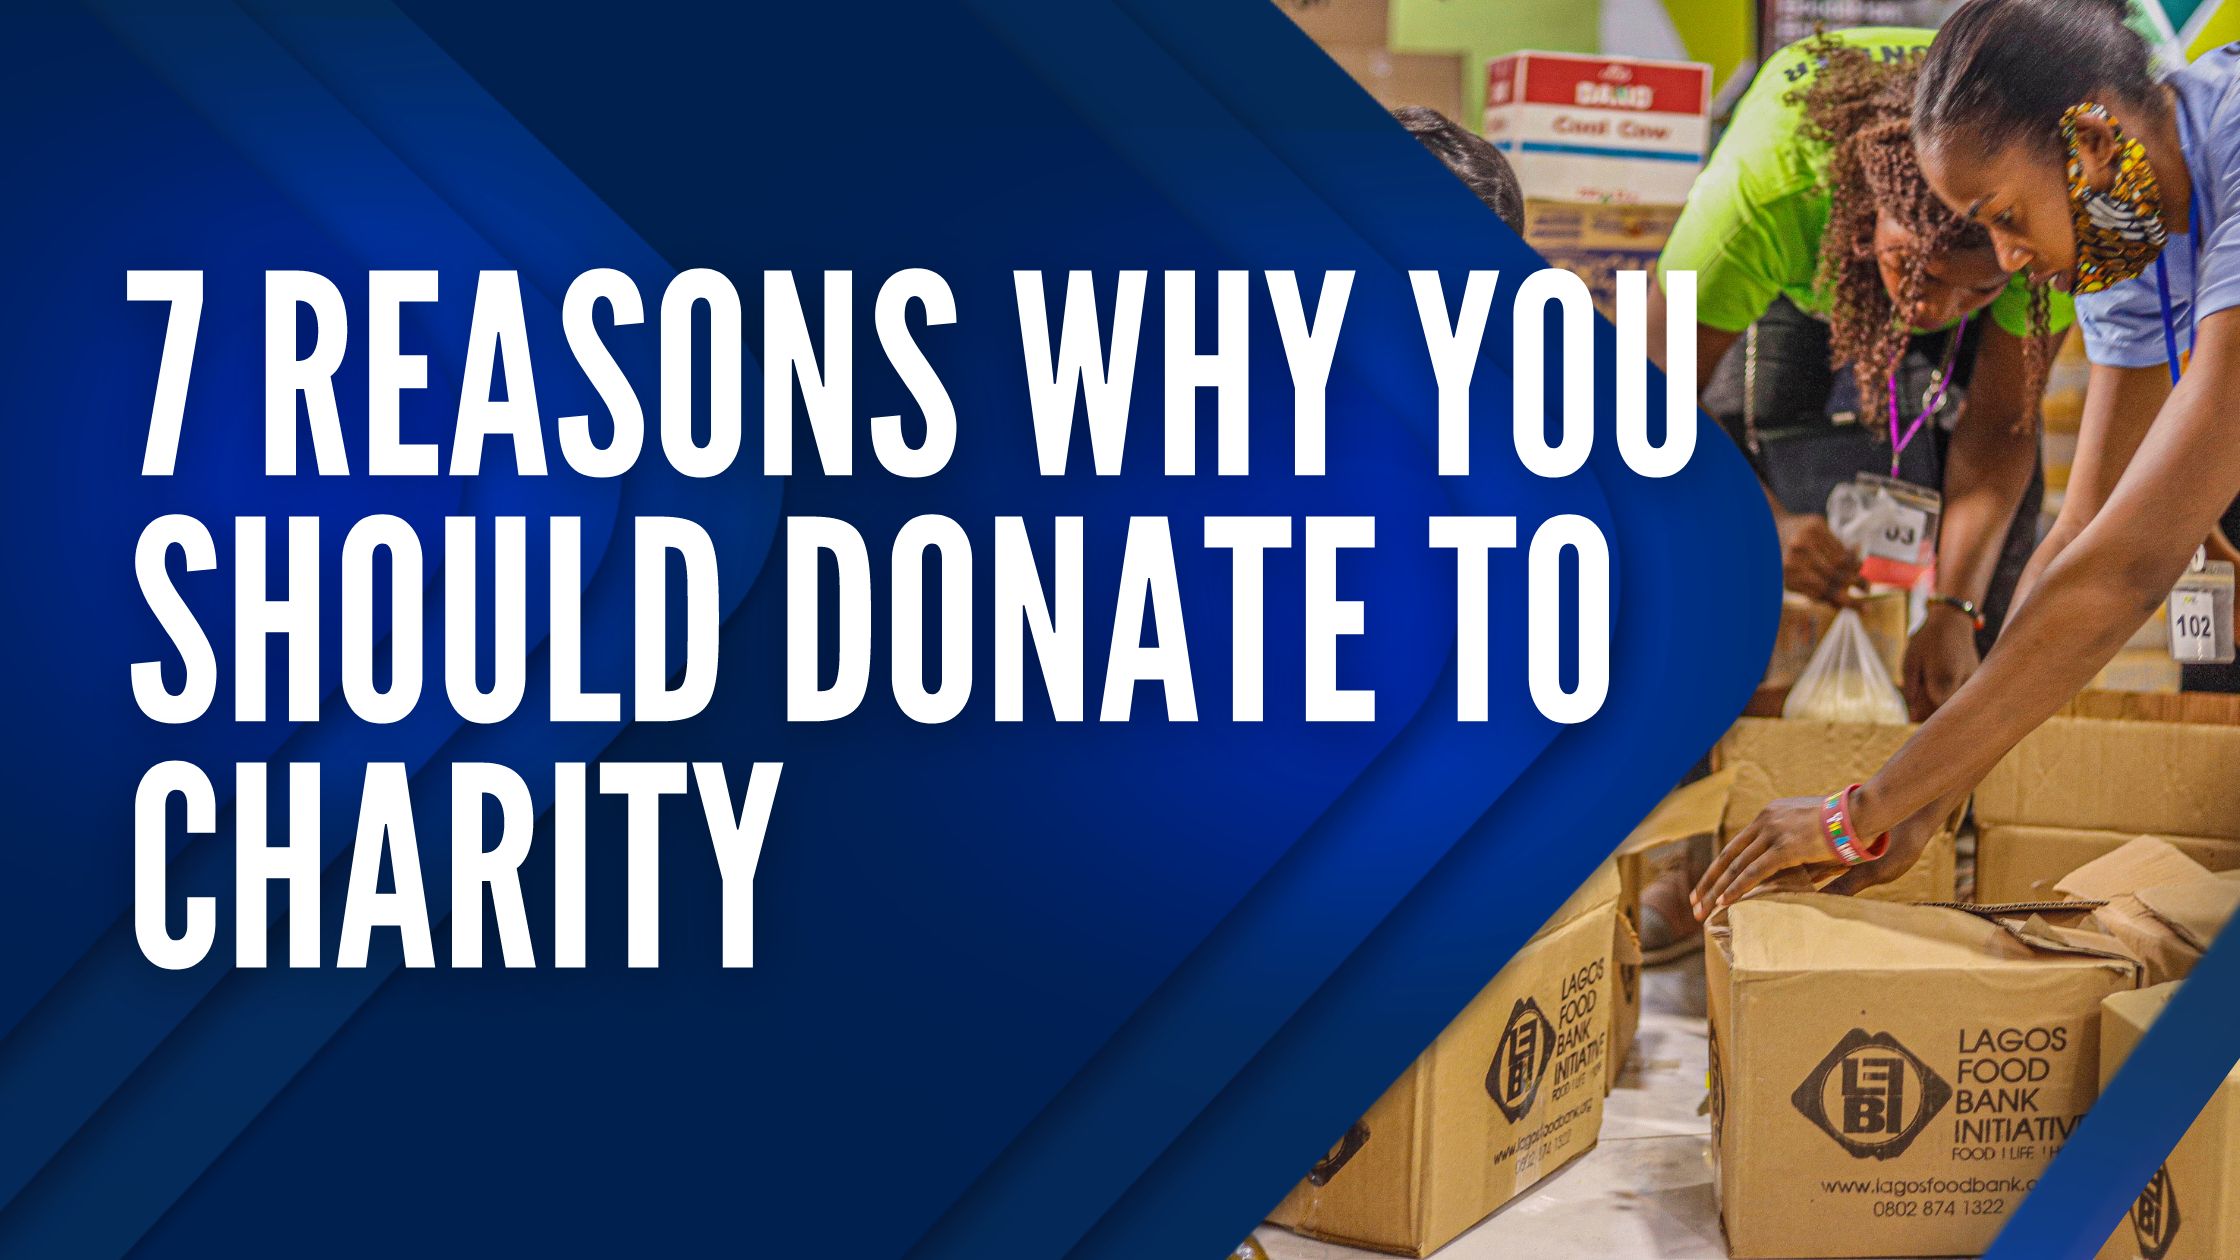 7 reasons why you should donate to charity